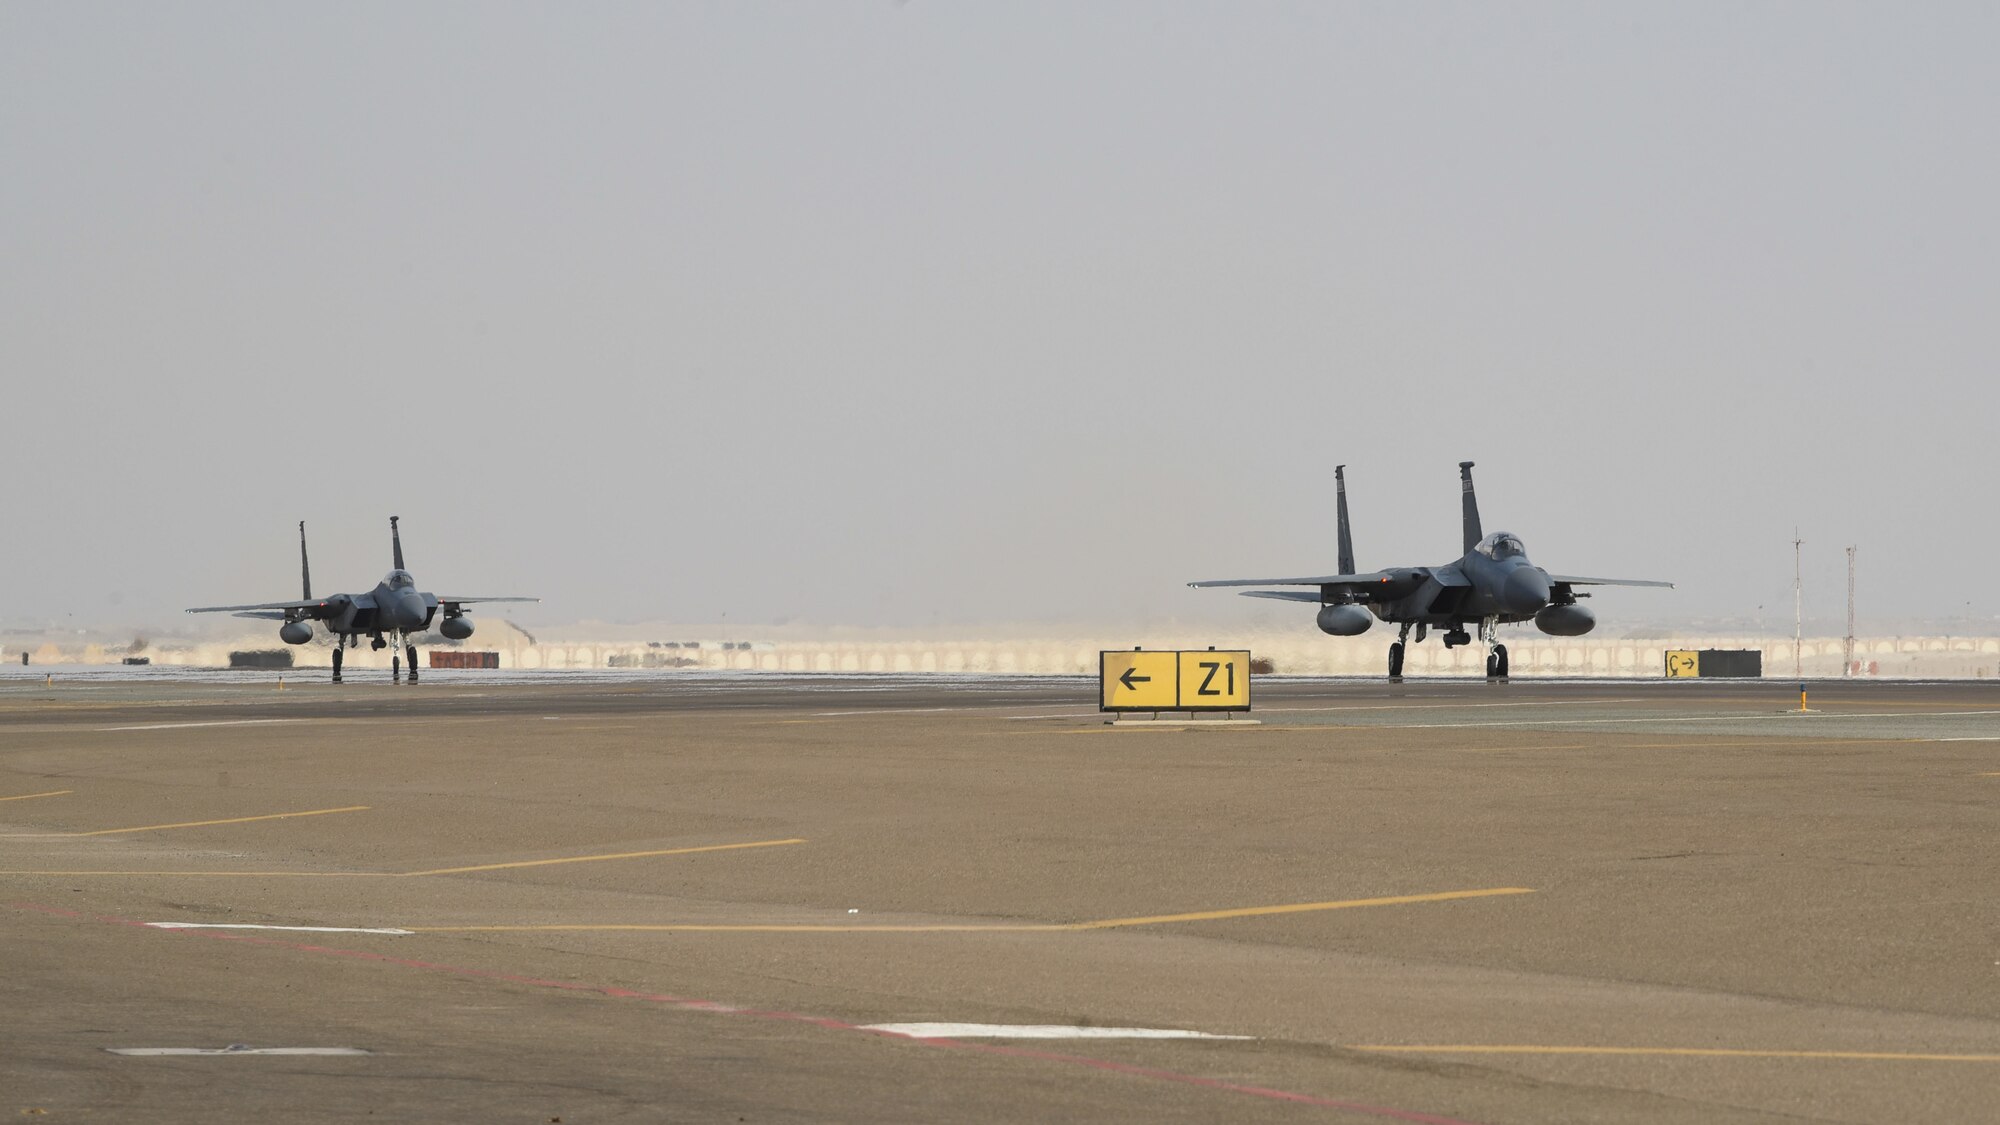 Two F-15C Eagles taxi after exercise Hype Eagle Aug. 18, 2019, at Al Dhafra Air Base, United Arab Emirates. The 159th Expeditionary Fighter Squadron forward deployed to Prince Sultan Air Base, Saudi Arabia to challenge their flexibility at expanding tactical and strategical reach while strengthening coalition and regional partnerships in the U.S. Central Command area of responsibility. (U.S. Air Force photo by Tech. Sgt. Jocelyn Ford)